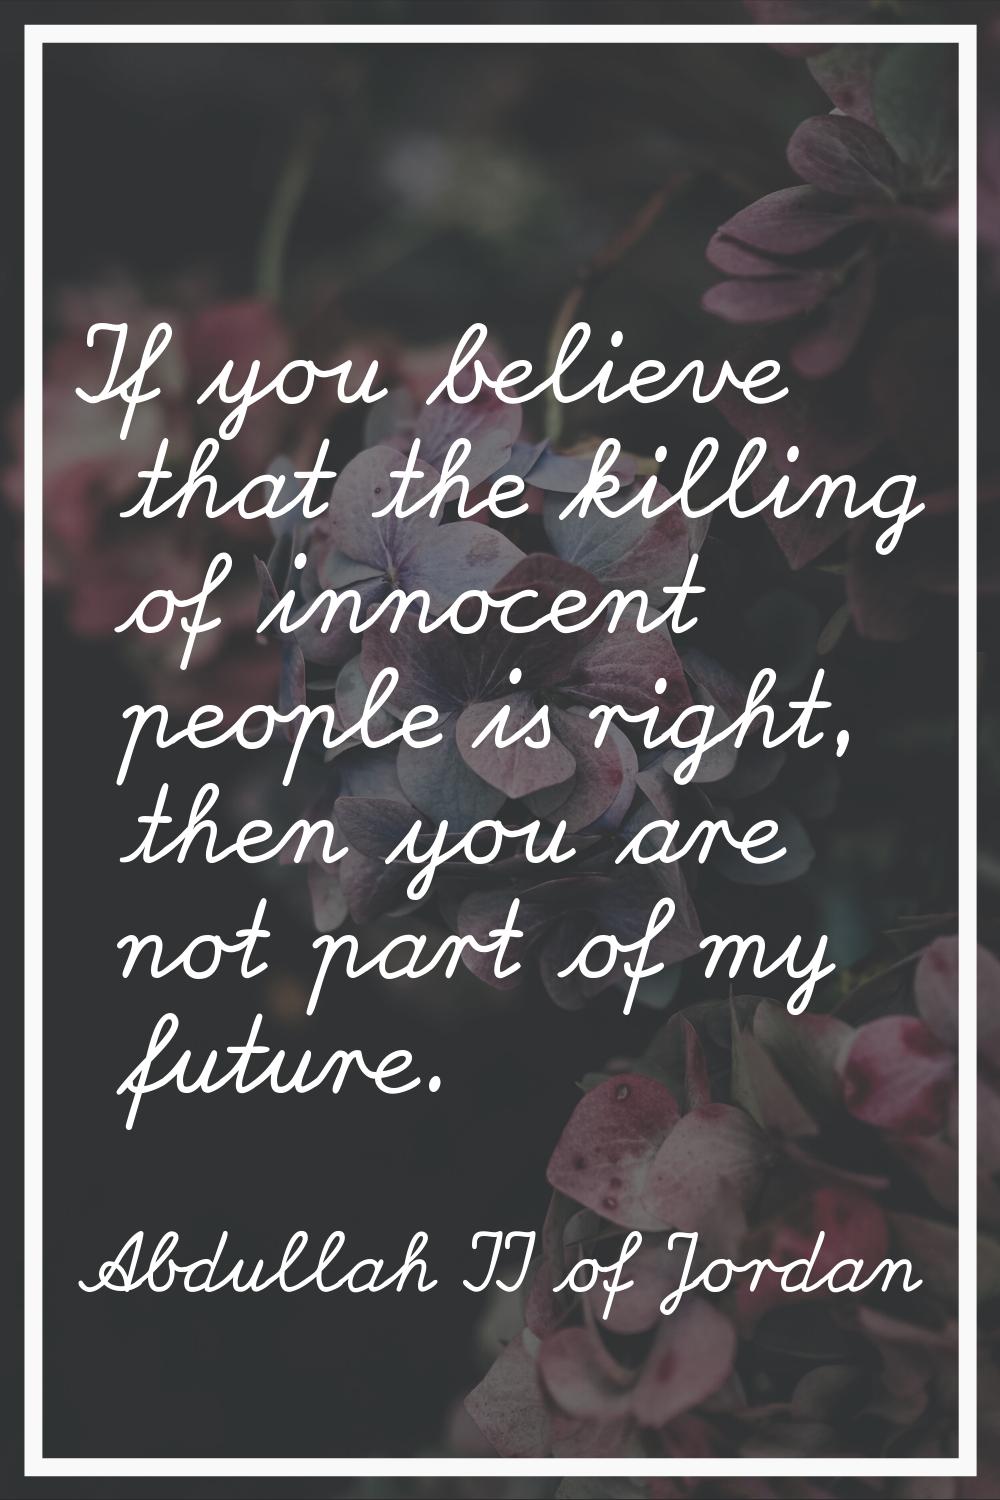 If you believe that the killing of innocent people is right, then you are not part of my future.